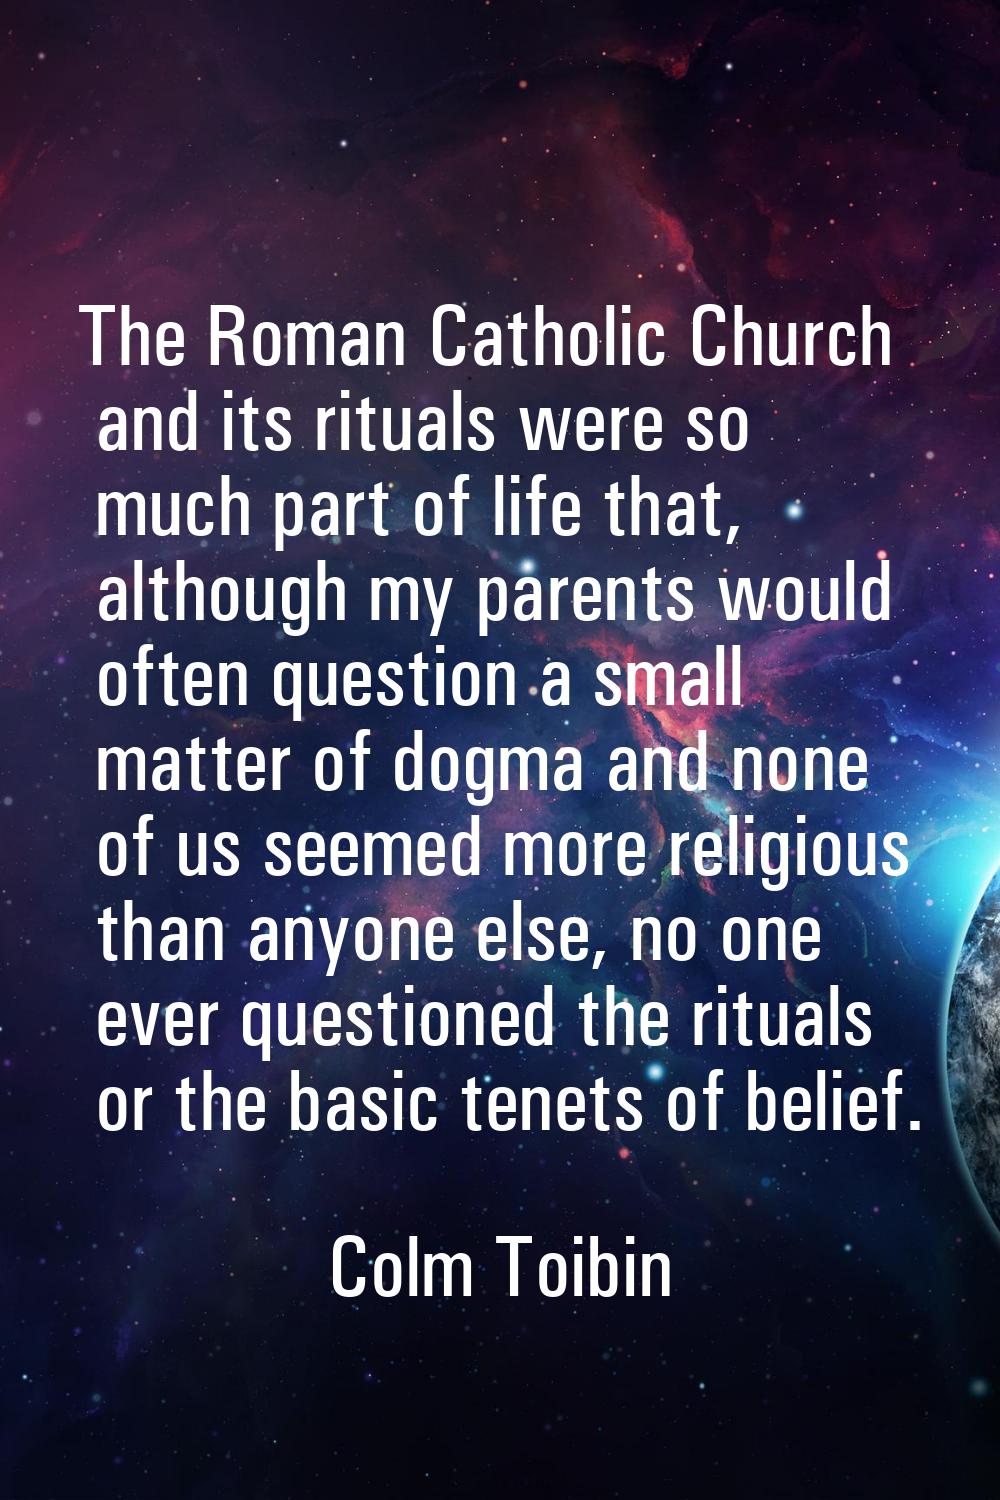 The Roman Catholic Church and its rituals were so much part of life that, although my parents would